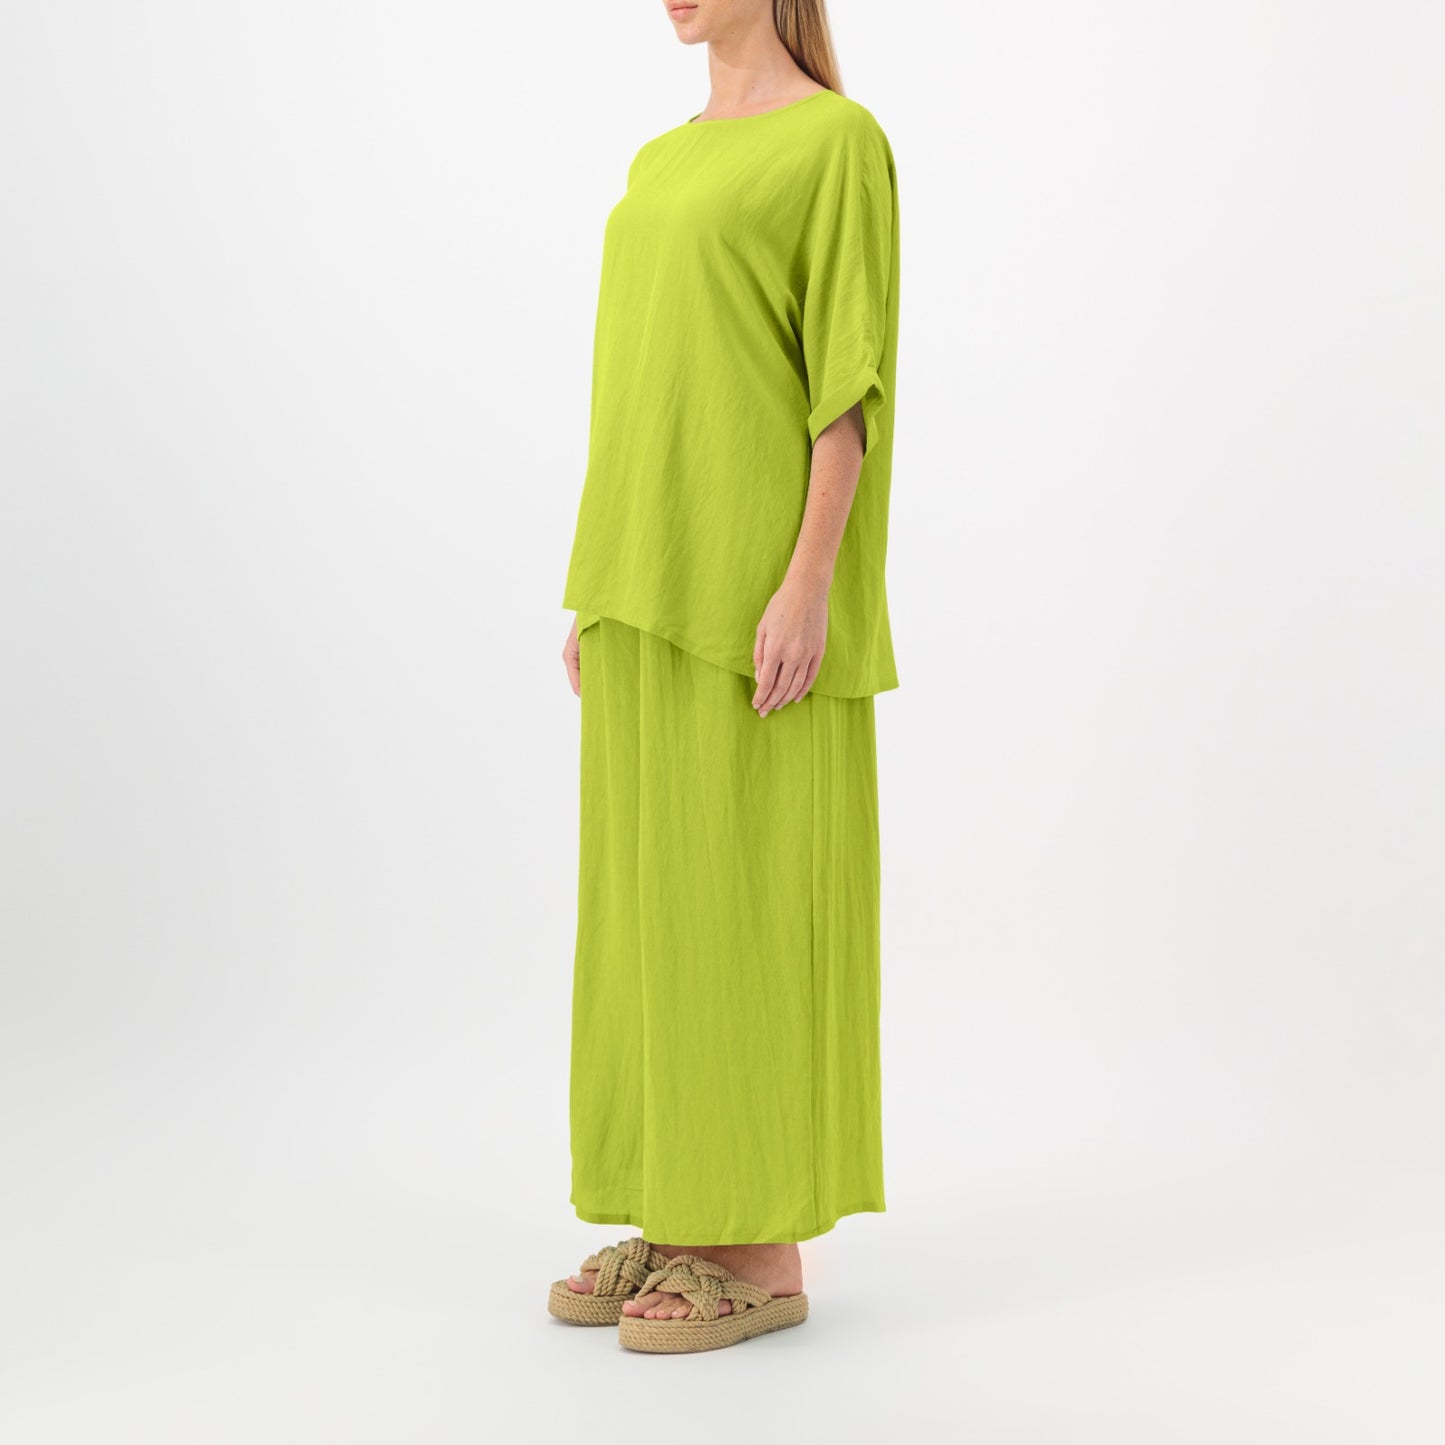 Lime Green Set Outfit - All Day Closet Set of 2  - Comfortable style in attractive colors -  arabian outfit - casual setcasual set - all day outfits - closet fashion store